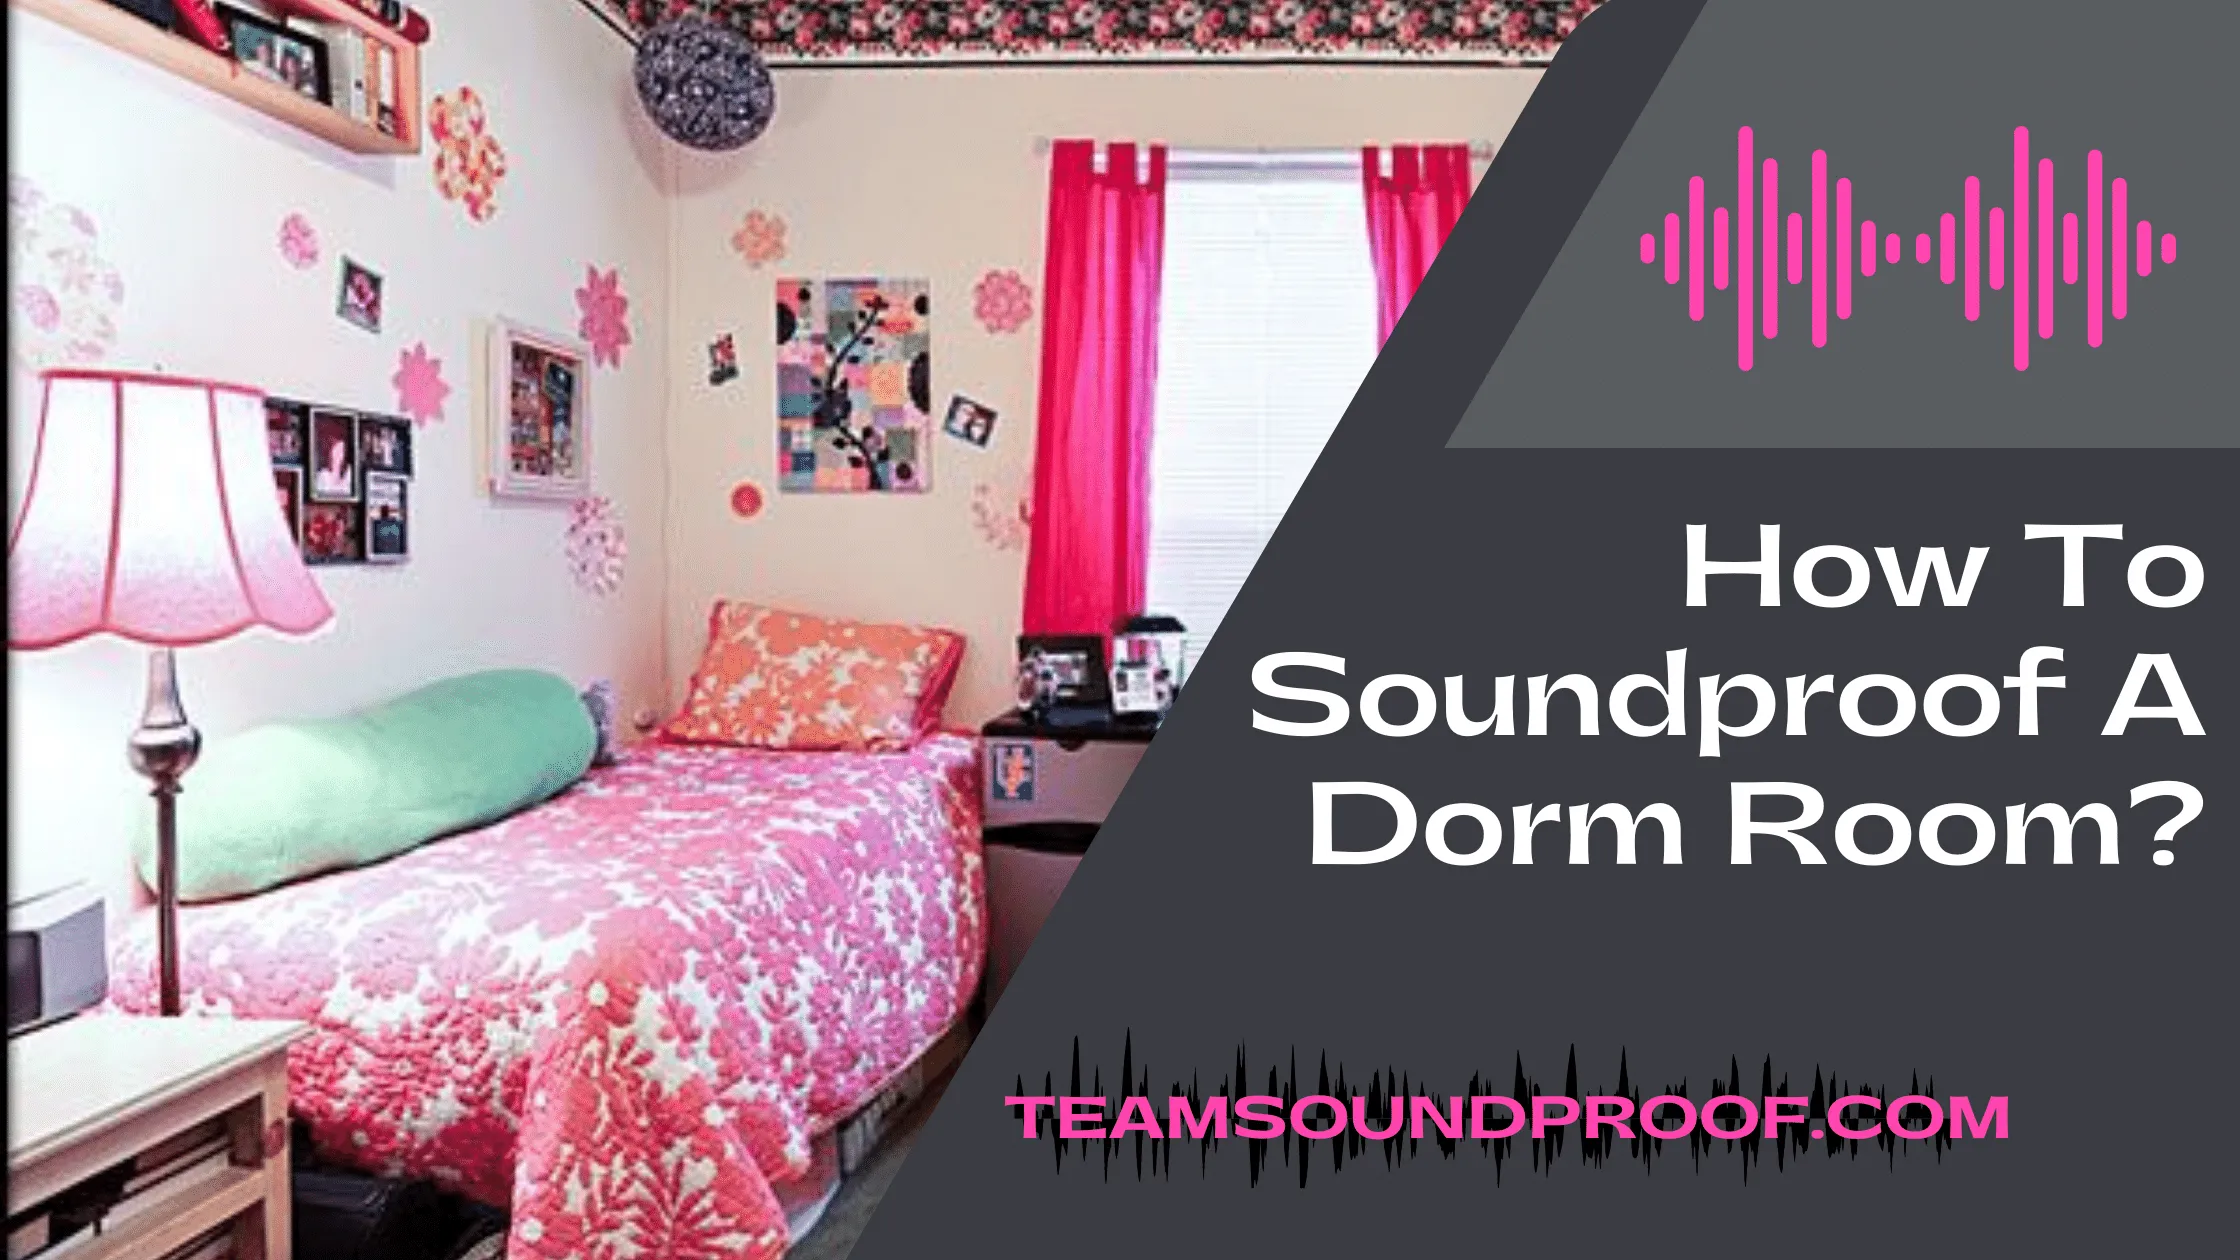 How To Soundproof A Dorm Room? - Latest Guide